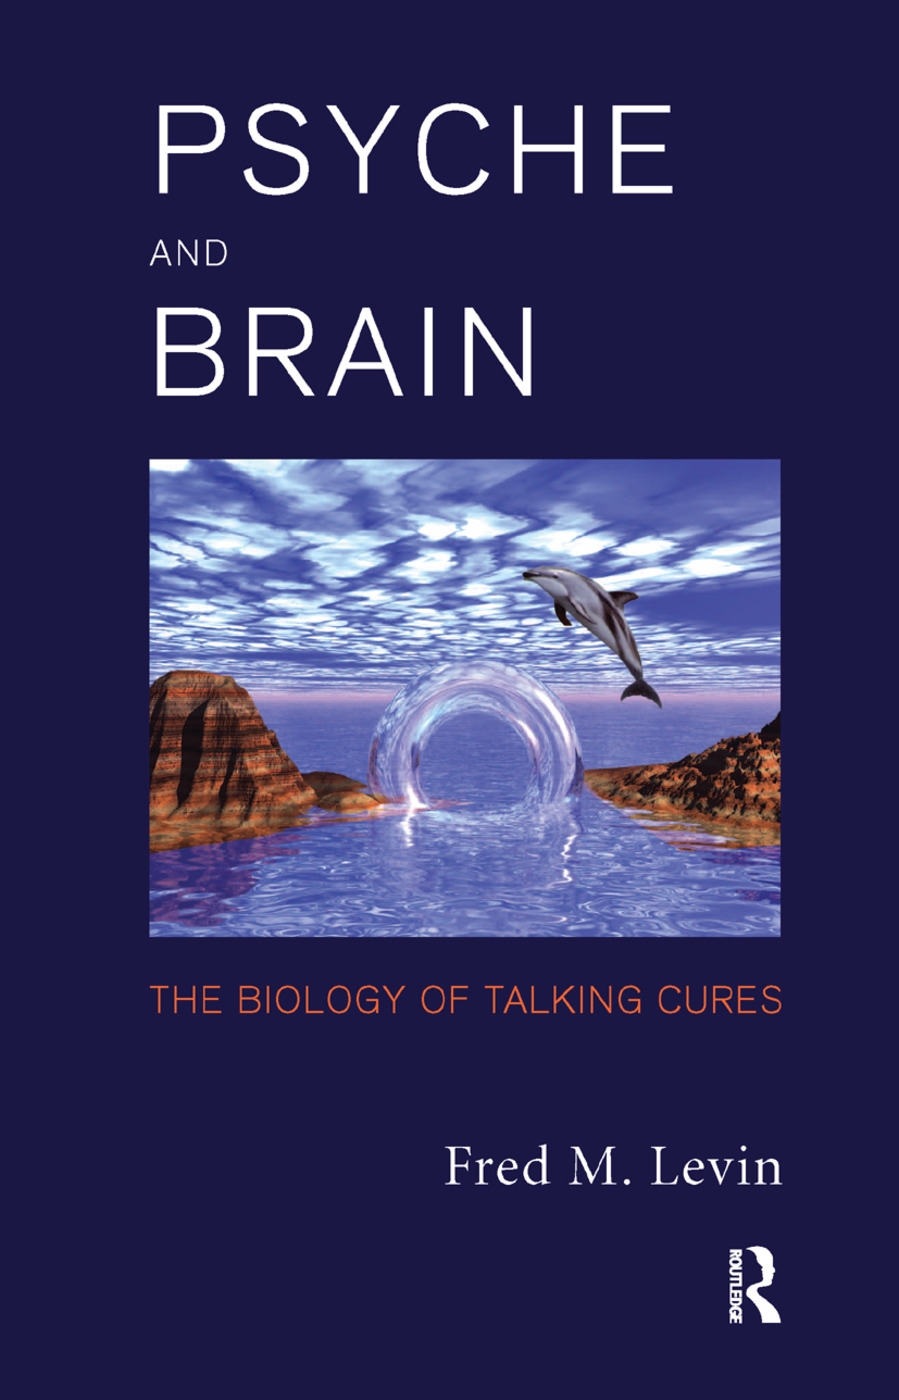 Psyche and Brain: The Biology of Talking Cures